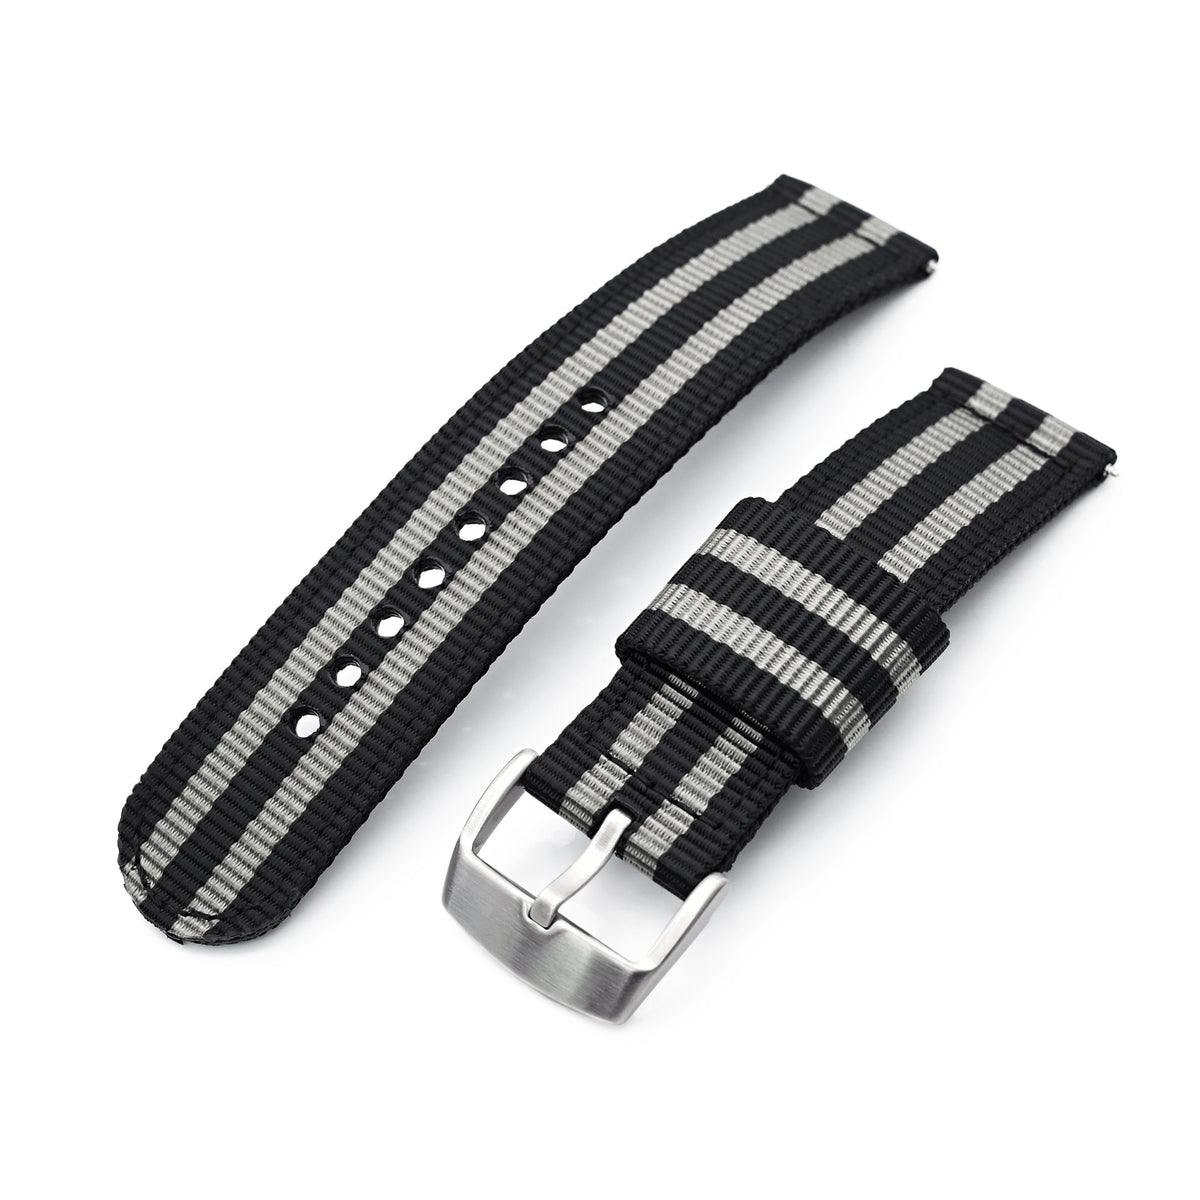 22mm 2-pcs Nylon Watch Band, Quick Release, Black &amp; Grey Stripes, Brushed Buckle Strapcode Watch Bands